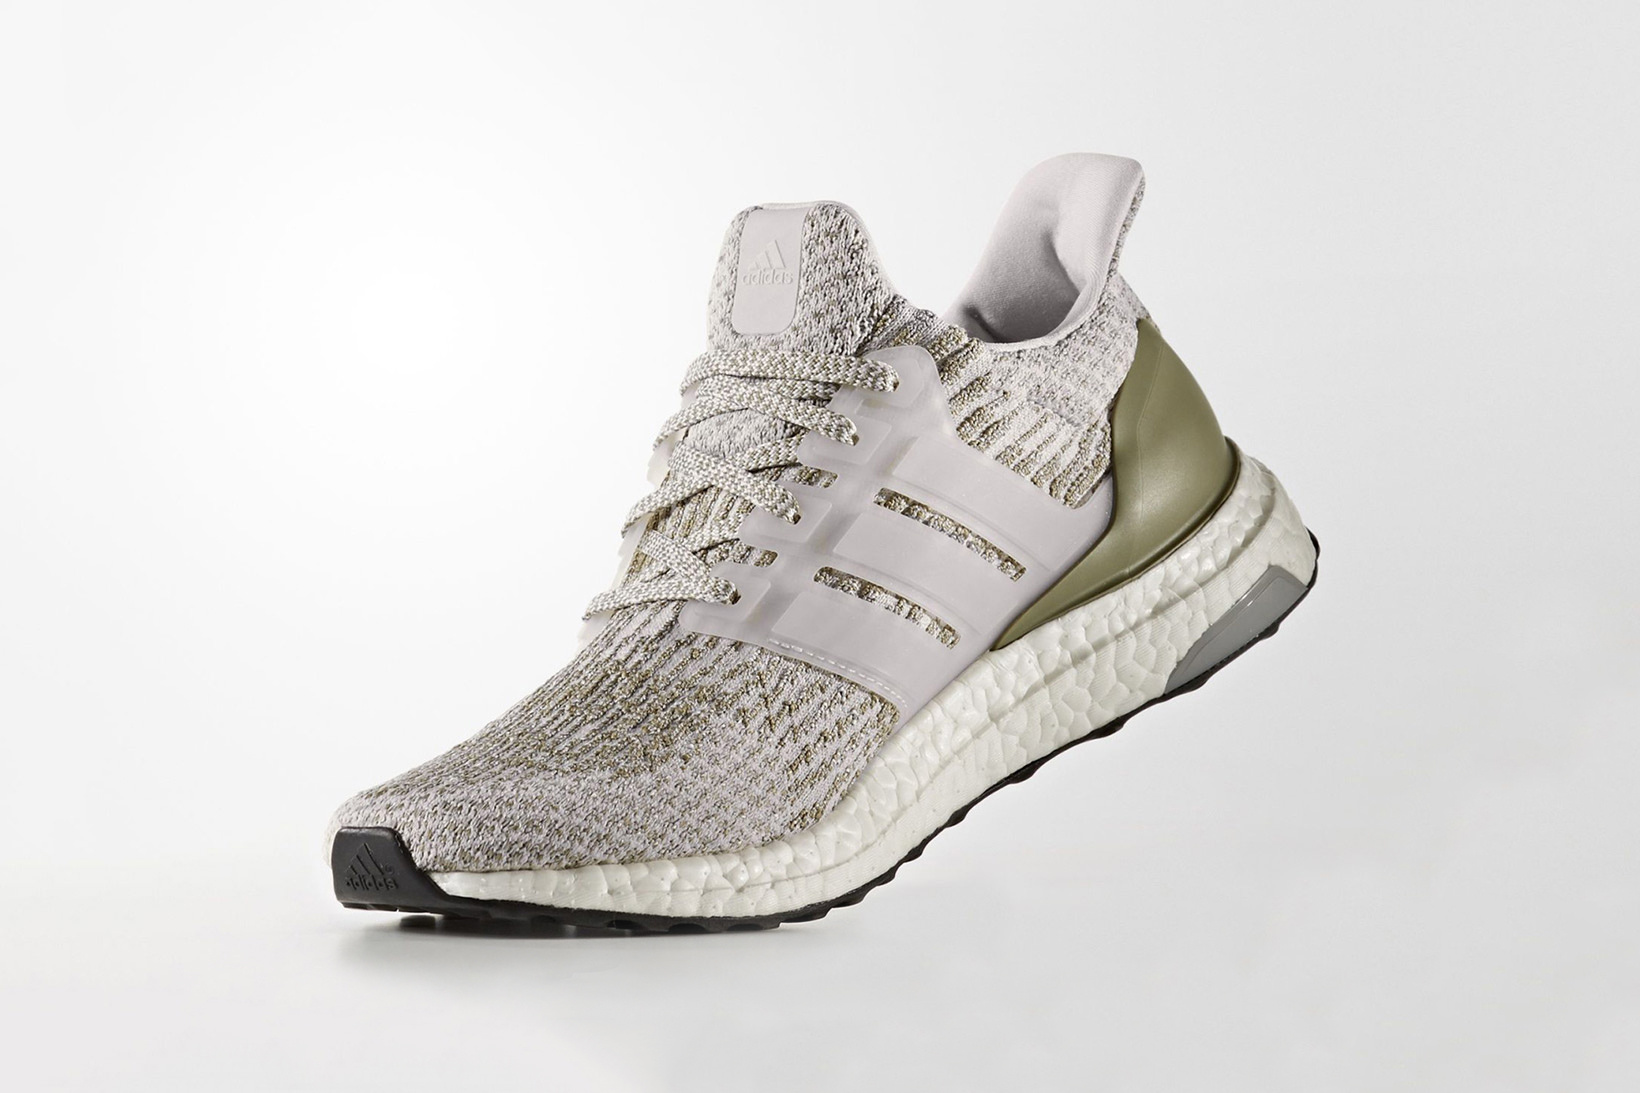 adidas UltraBOOST 3.0 Olive Grey - TRENDS periodical